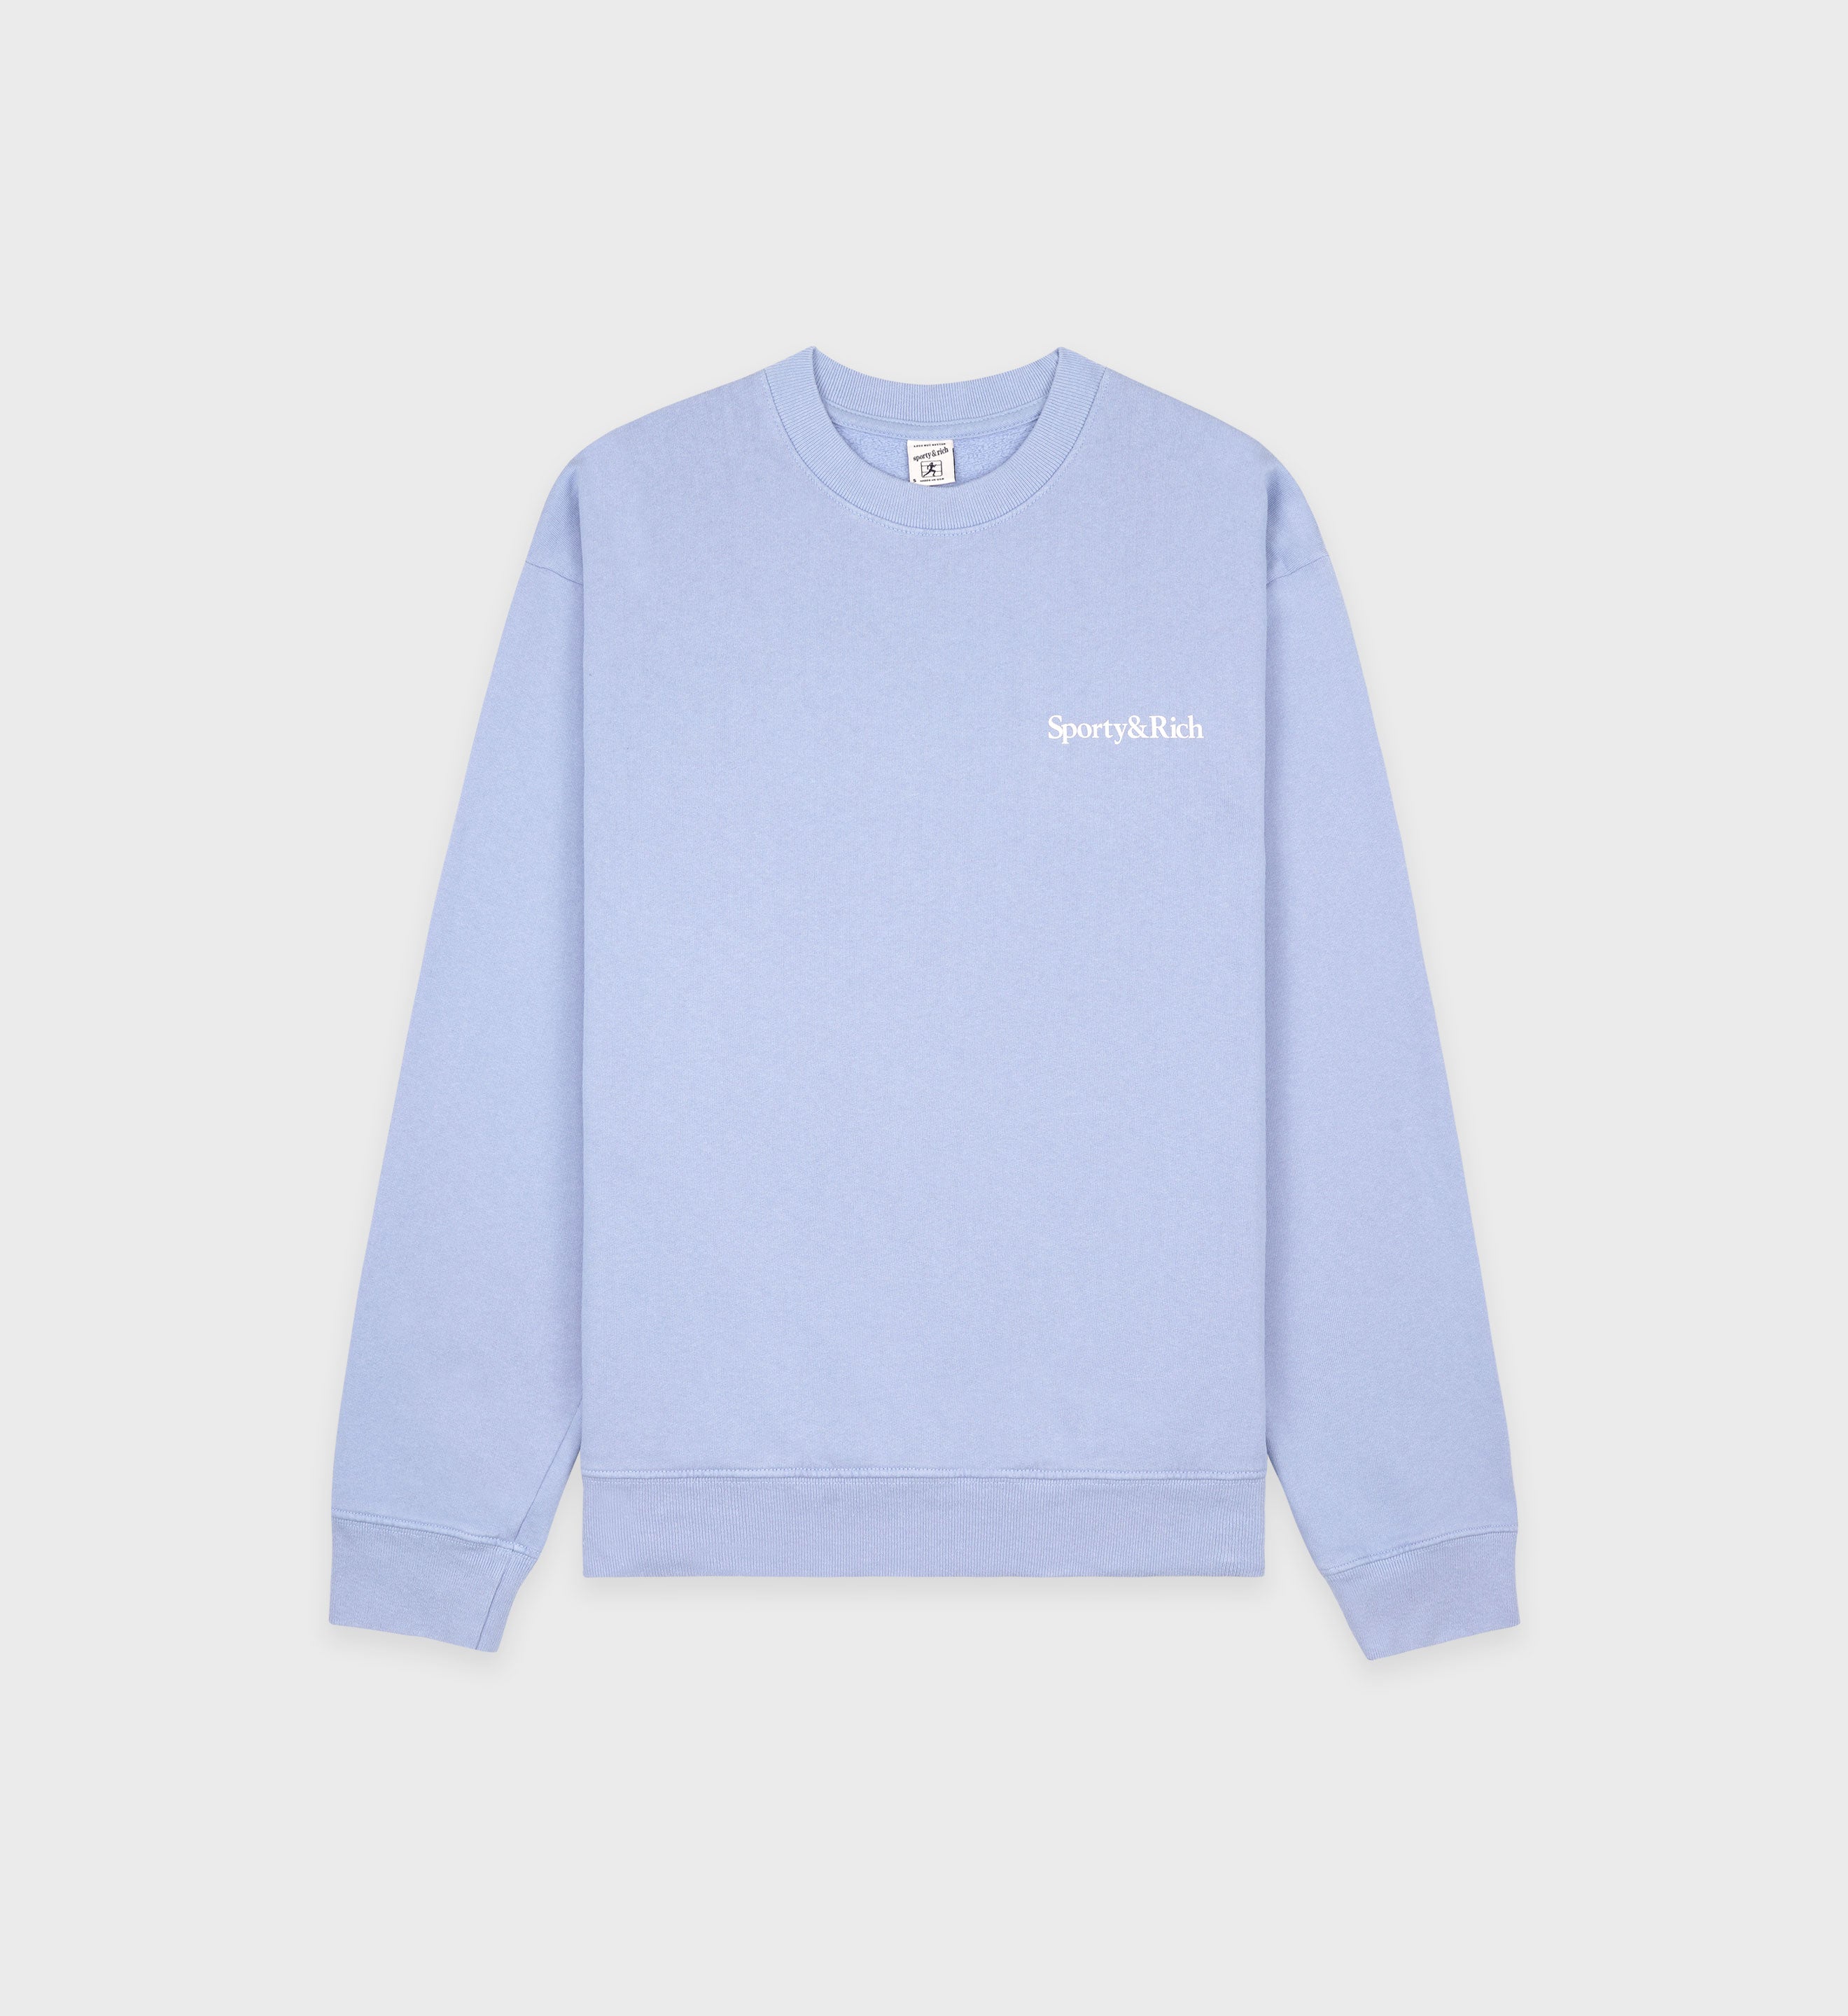 Health Is Wealth Crewneck - Periwinkle/White